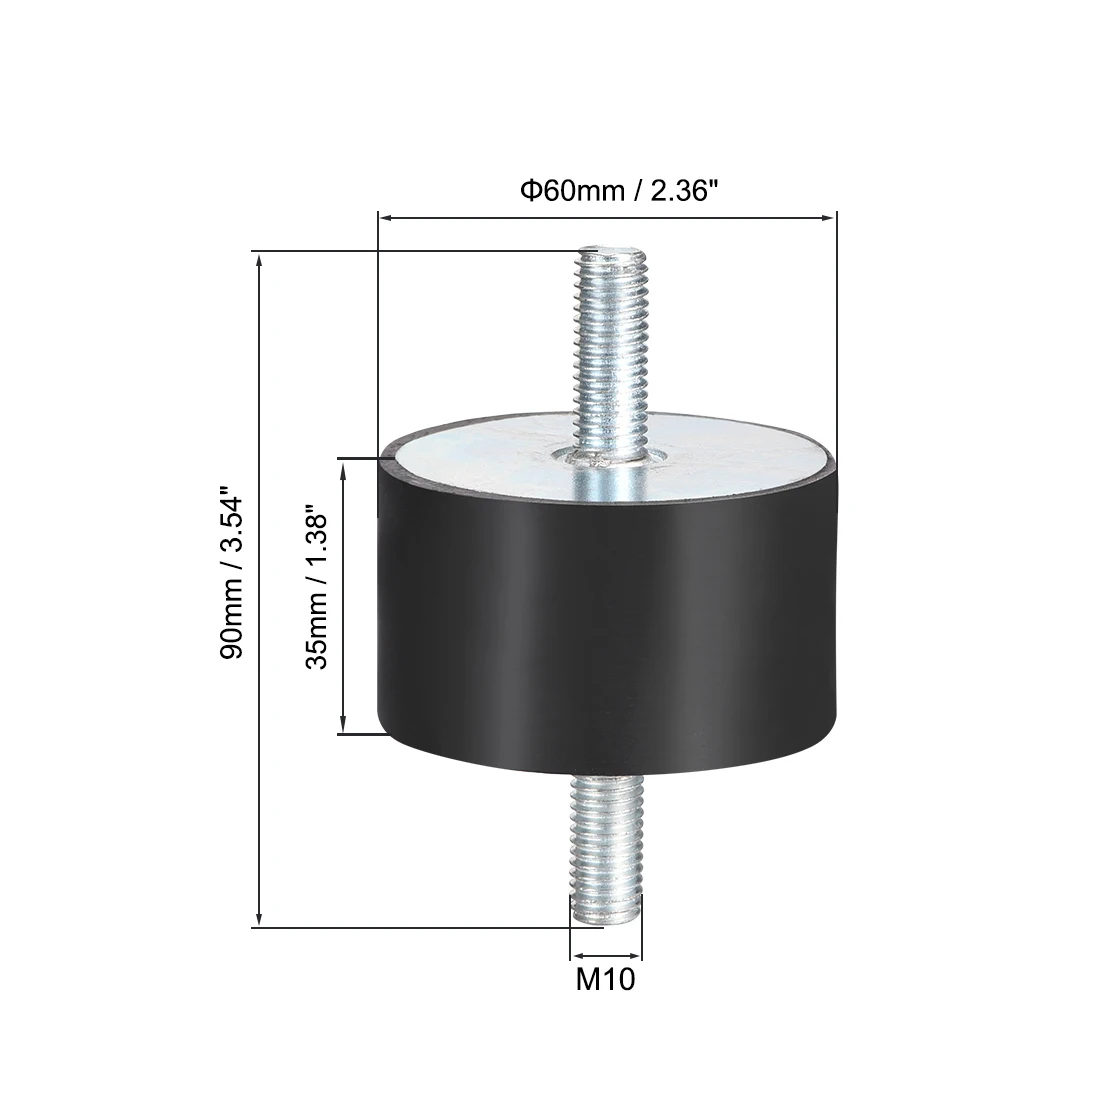 uxcell 50 x 40mm Rubber Mounts,Vibration Isolators,Shock Absorber with M10 x 27mm Studs 